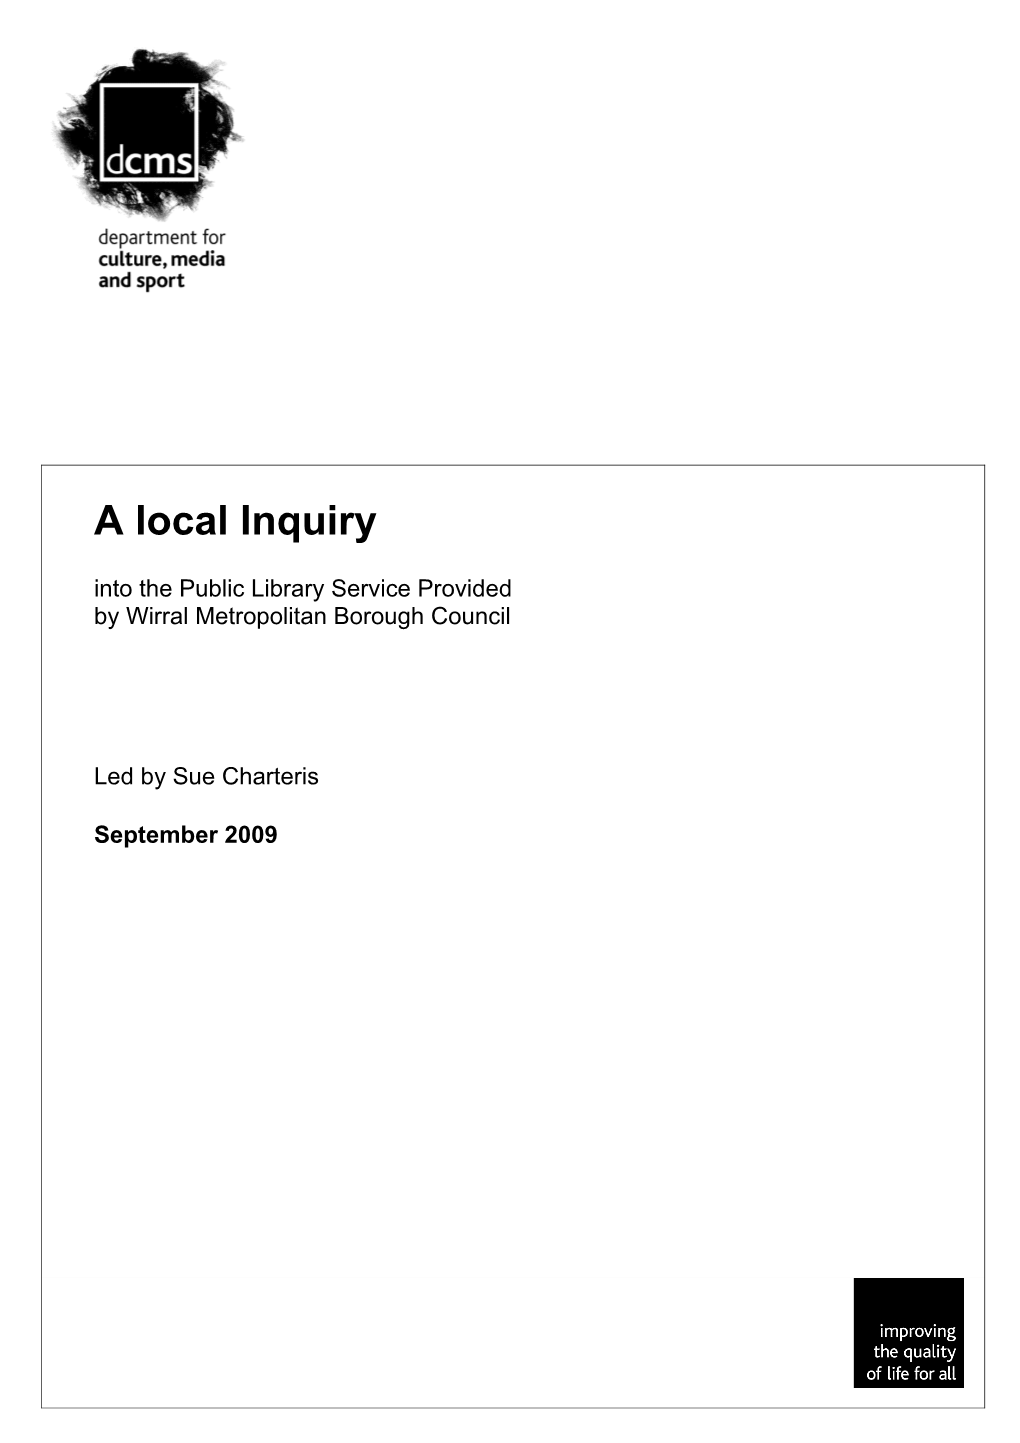 A Local Inquiry Into the Public Library Service Provided by Wirral Metropolitan Borough Council